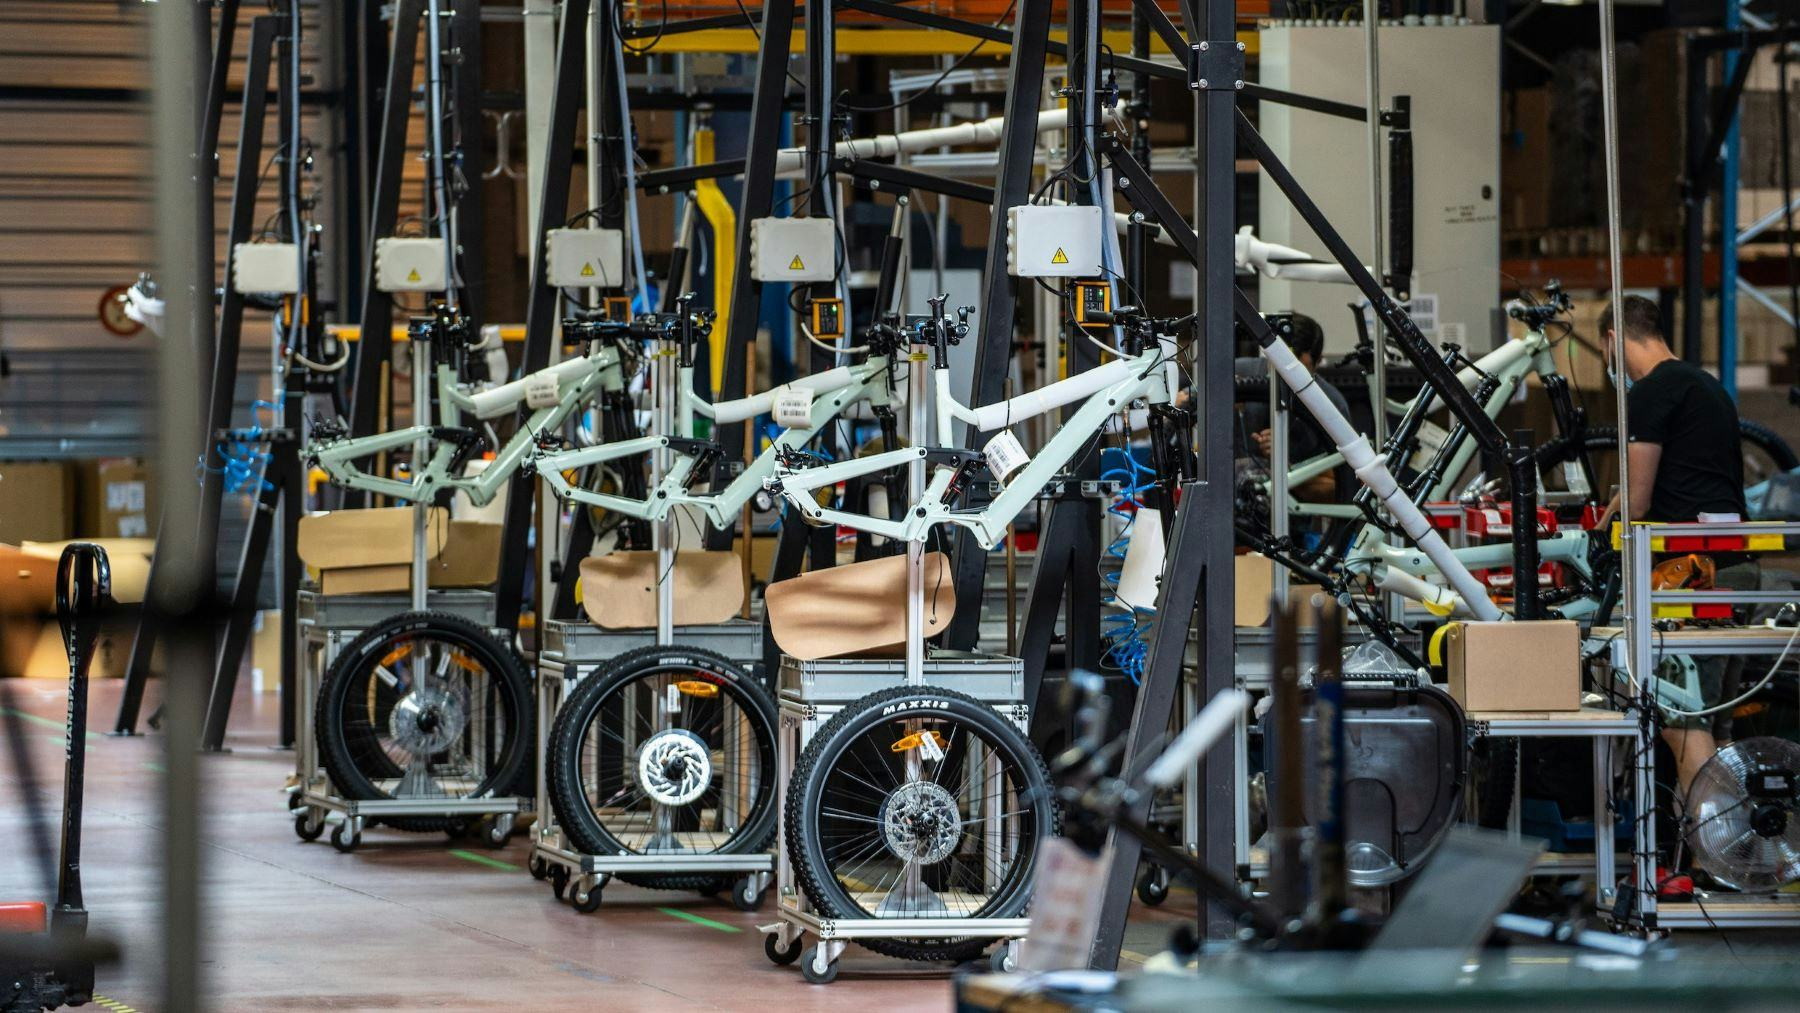 Moustache’s production facility, located in the Thaon-les-Vosges (Vosges) in France, can produce up to 100,000 e-bikes. For 2022, the production should reach between 55,000 and 70,000 against 50,000 in 2021. - Photo Moustache Bikes